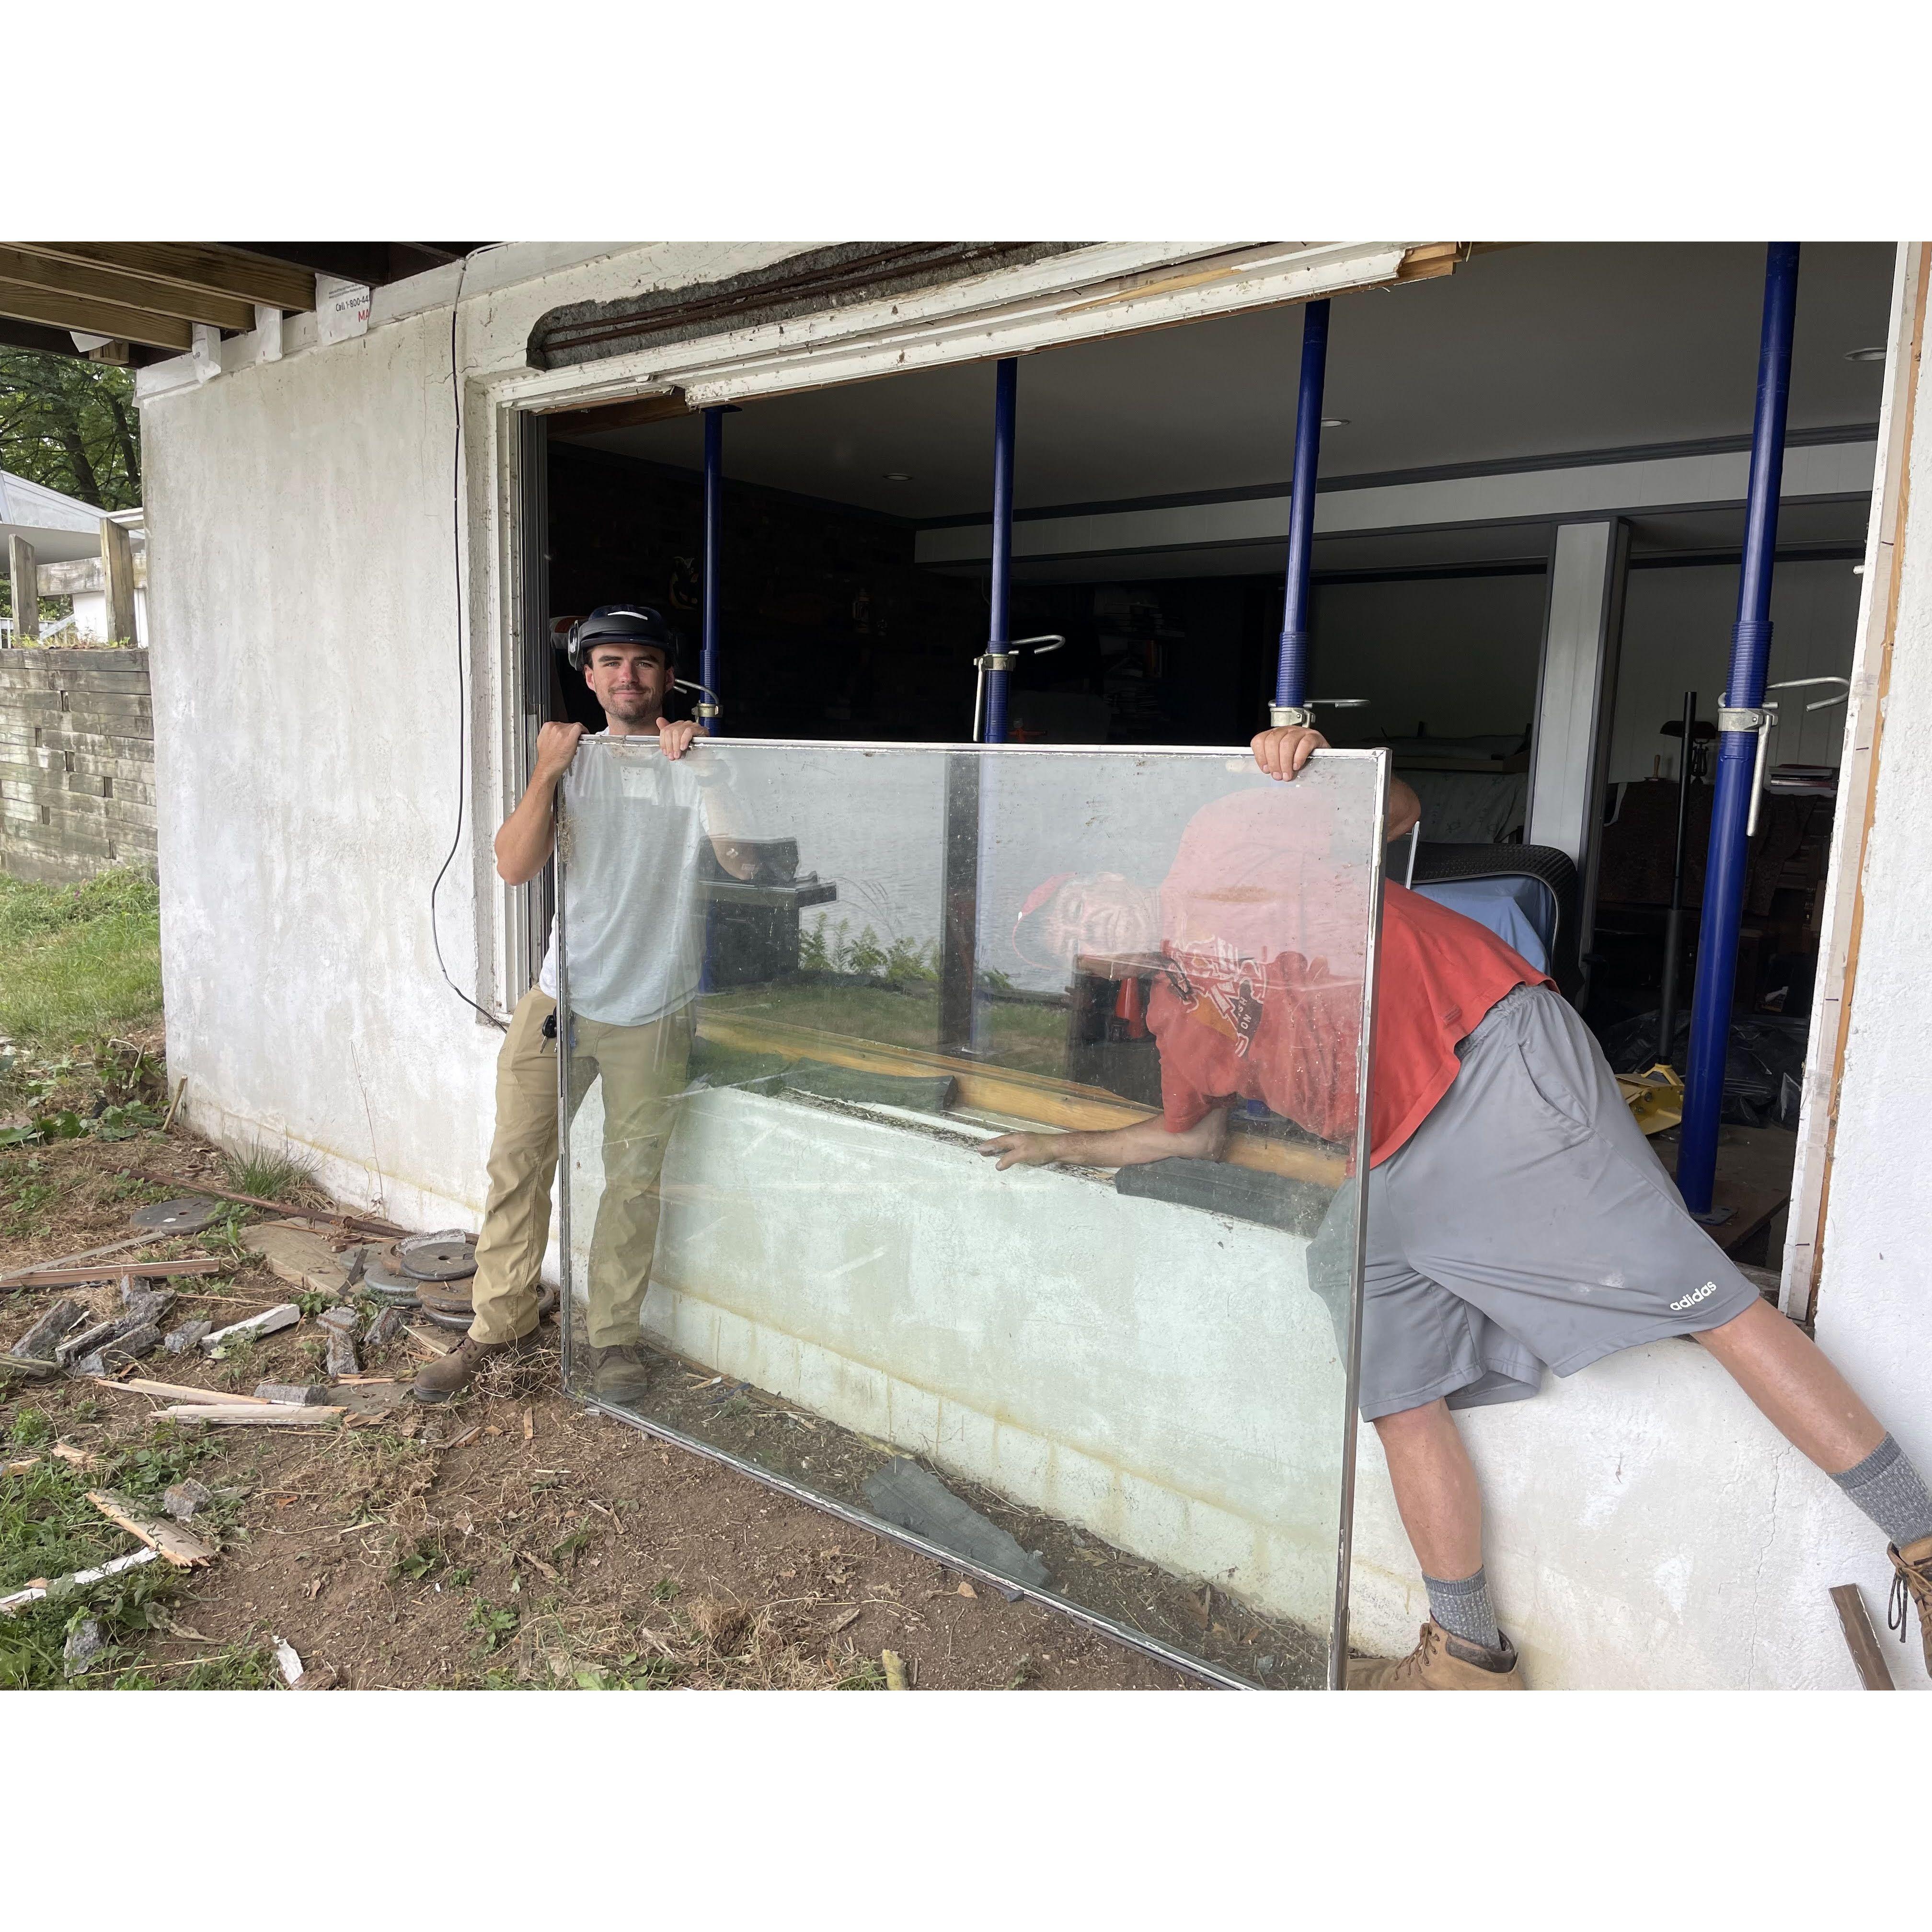 Matthew and Keith taking out the first floor window in preparation of replacing the header